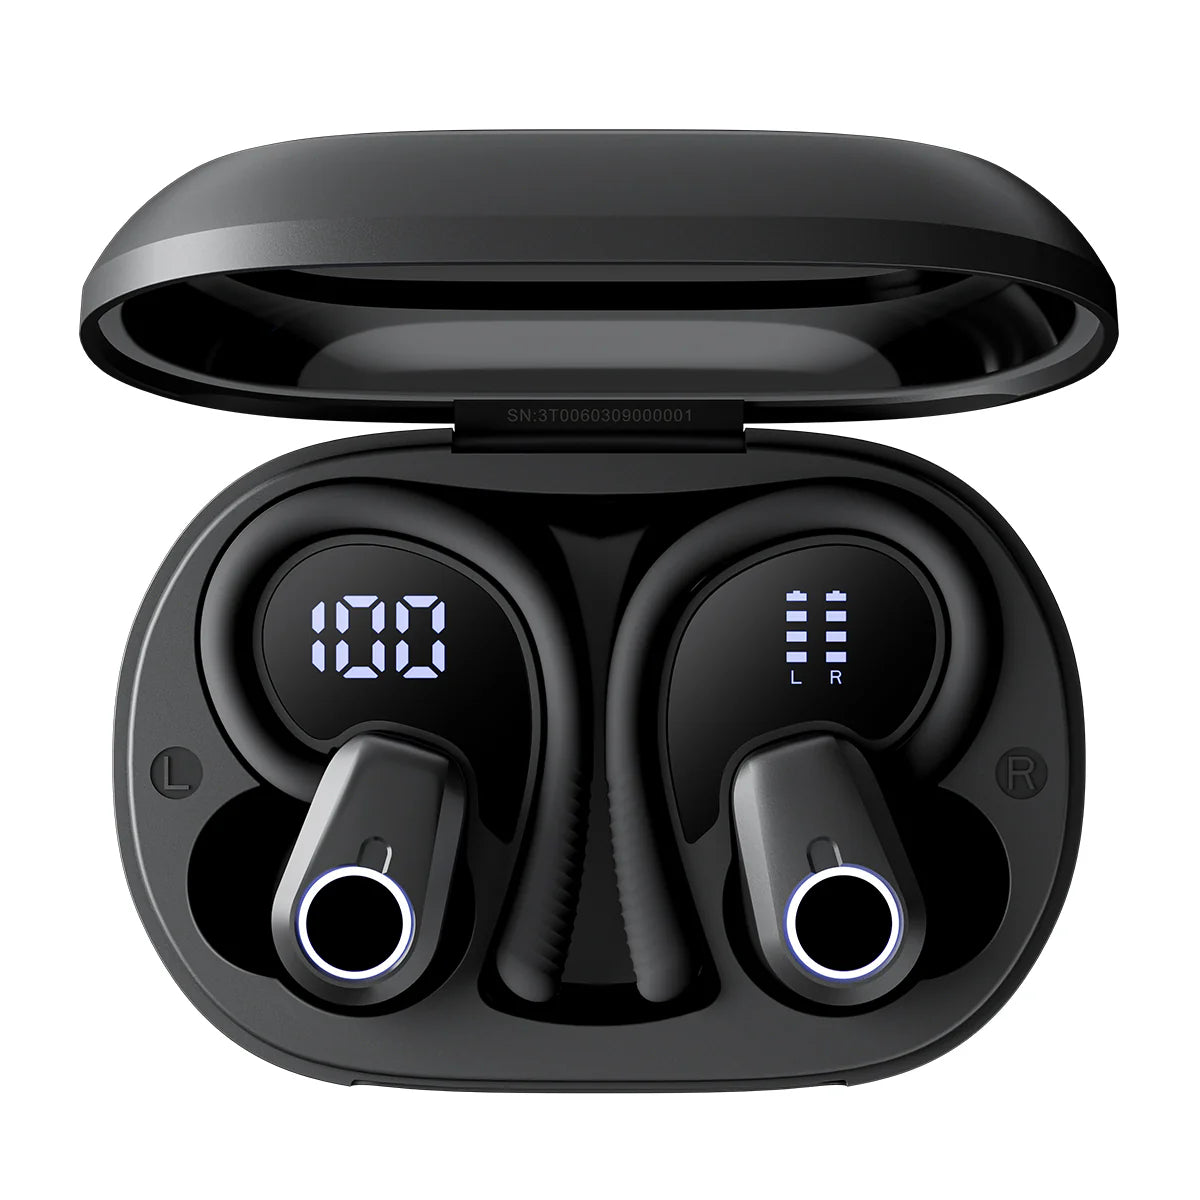 Blackview AirBuds 60 - Blackview